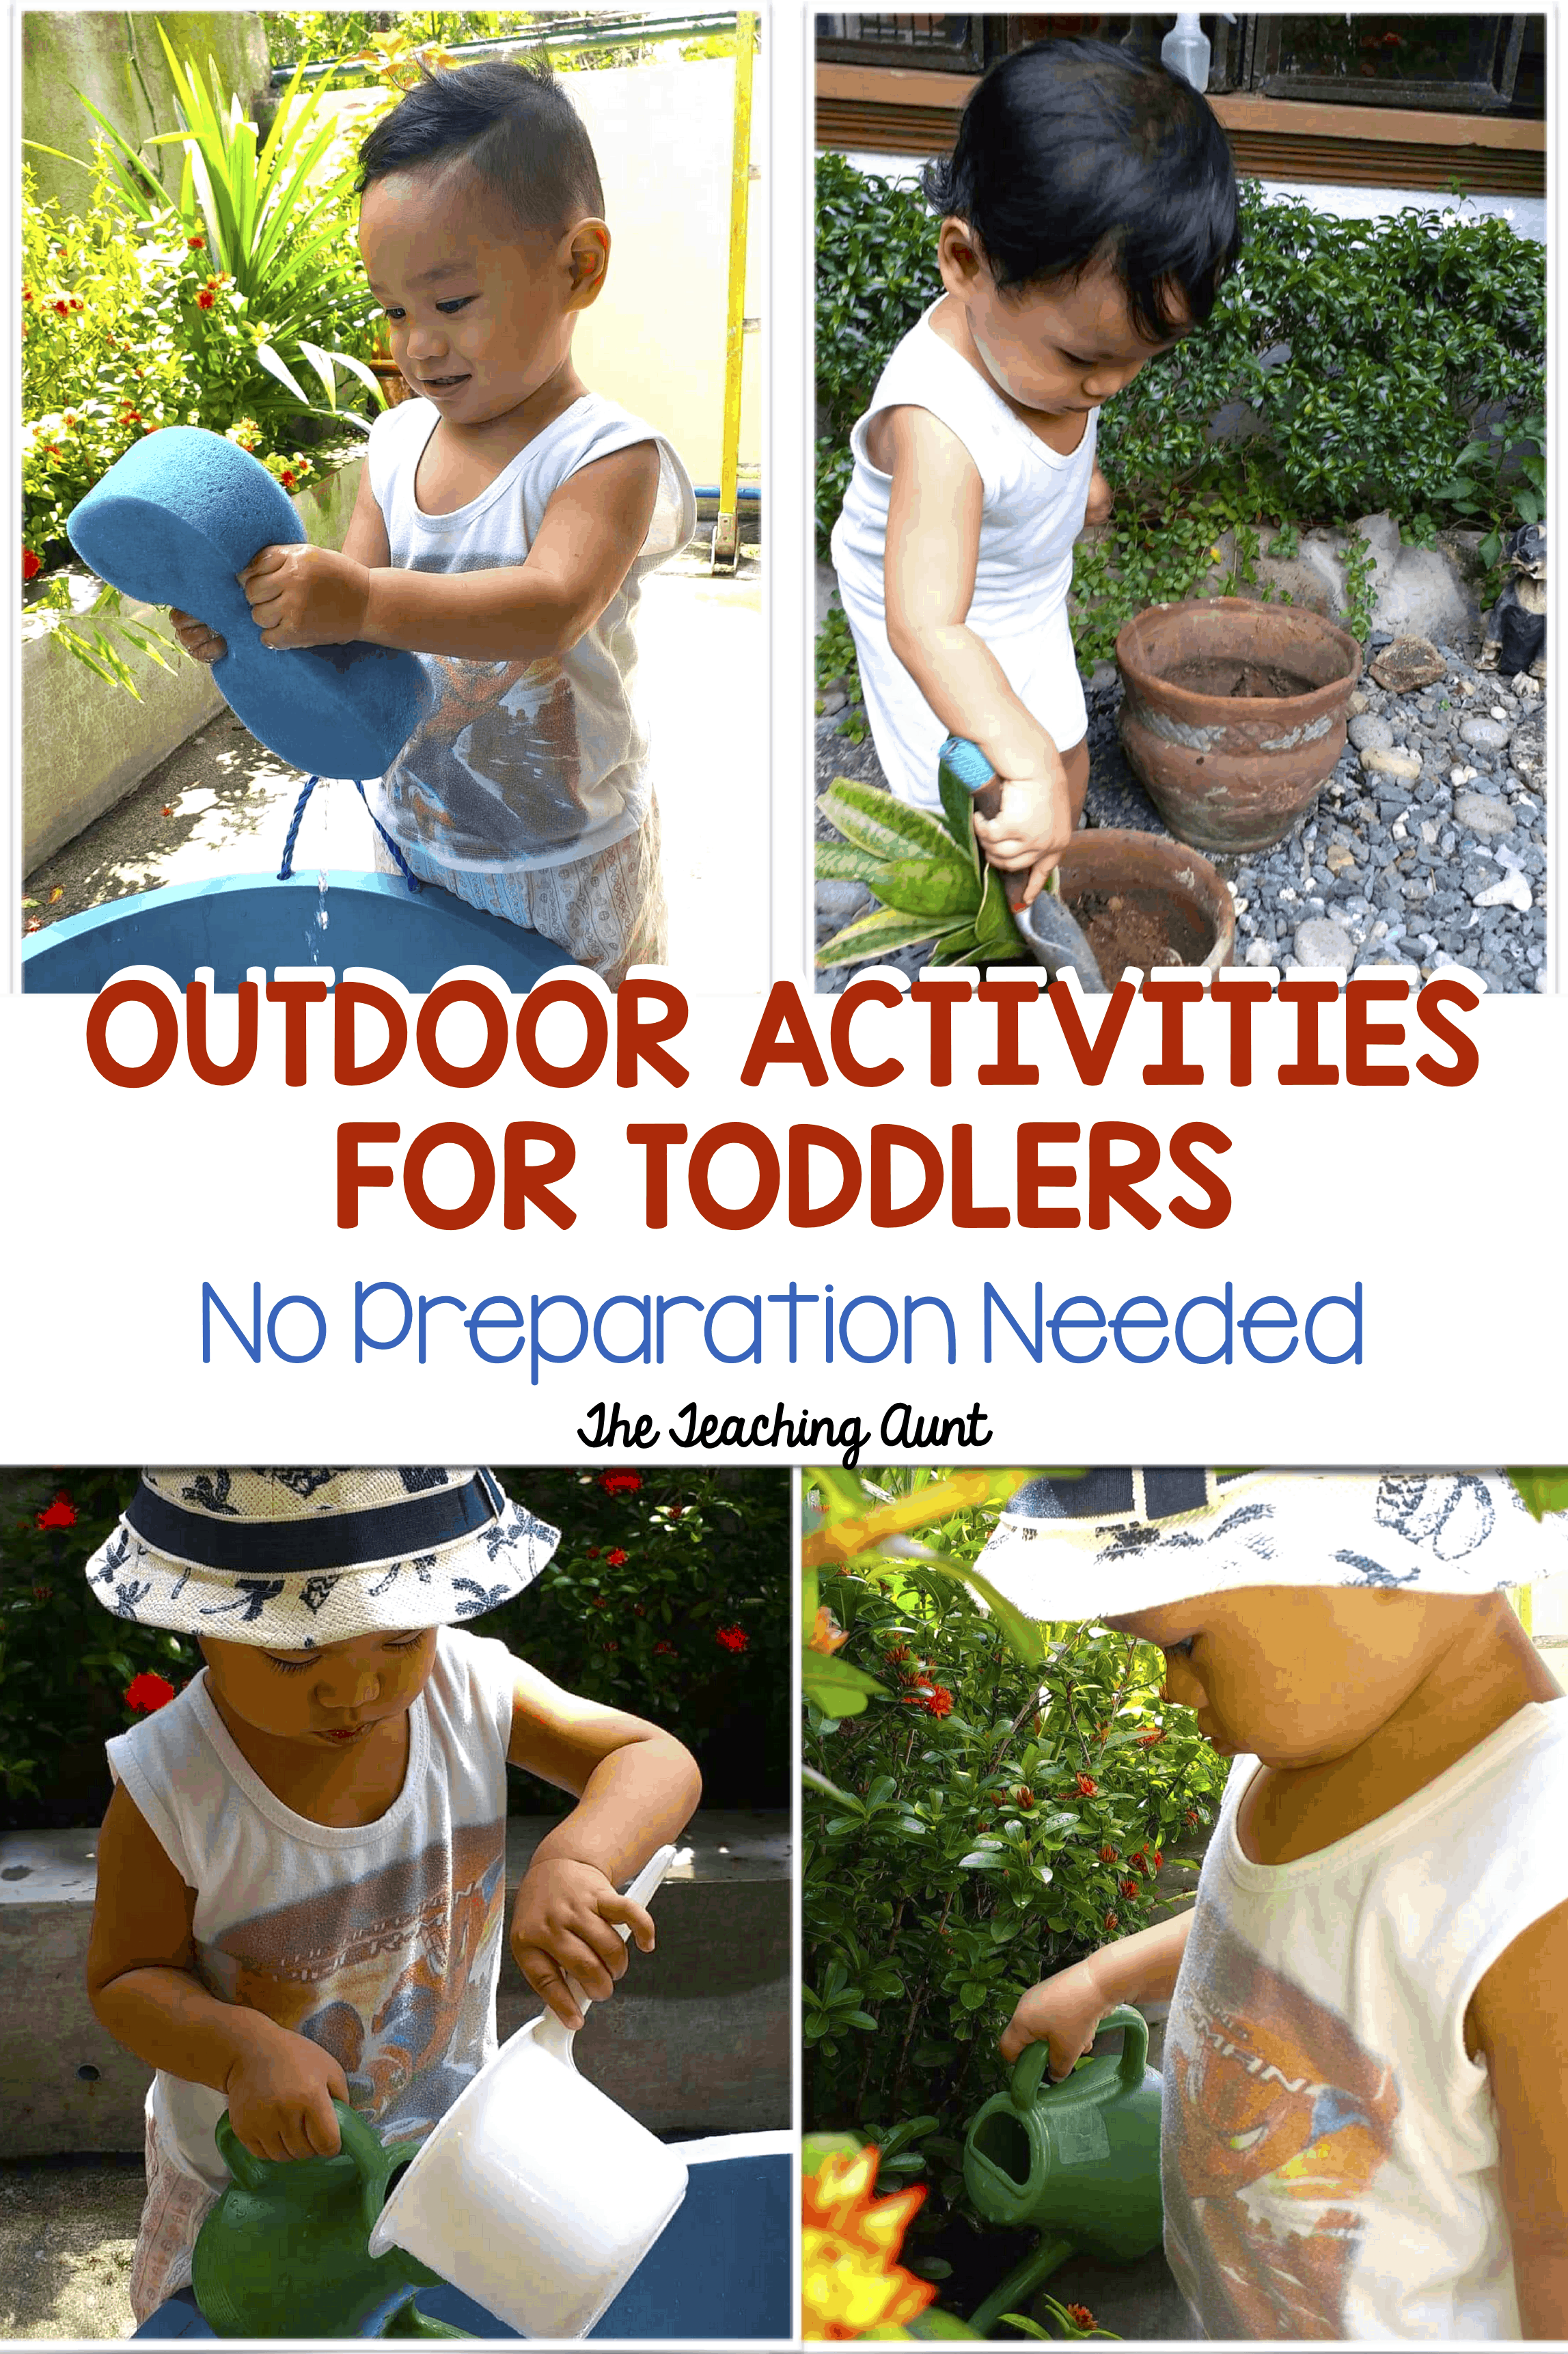 Outdoor Activities for Toddlers